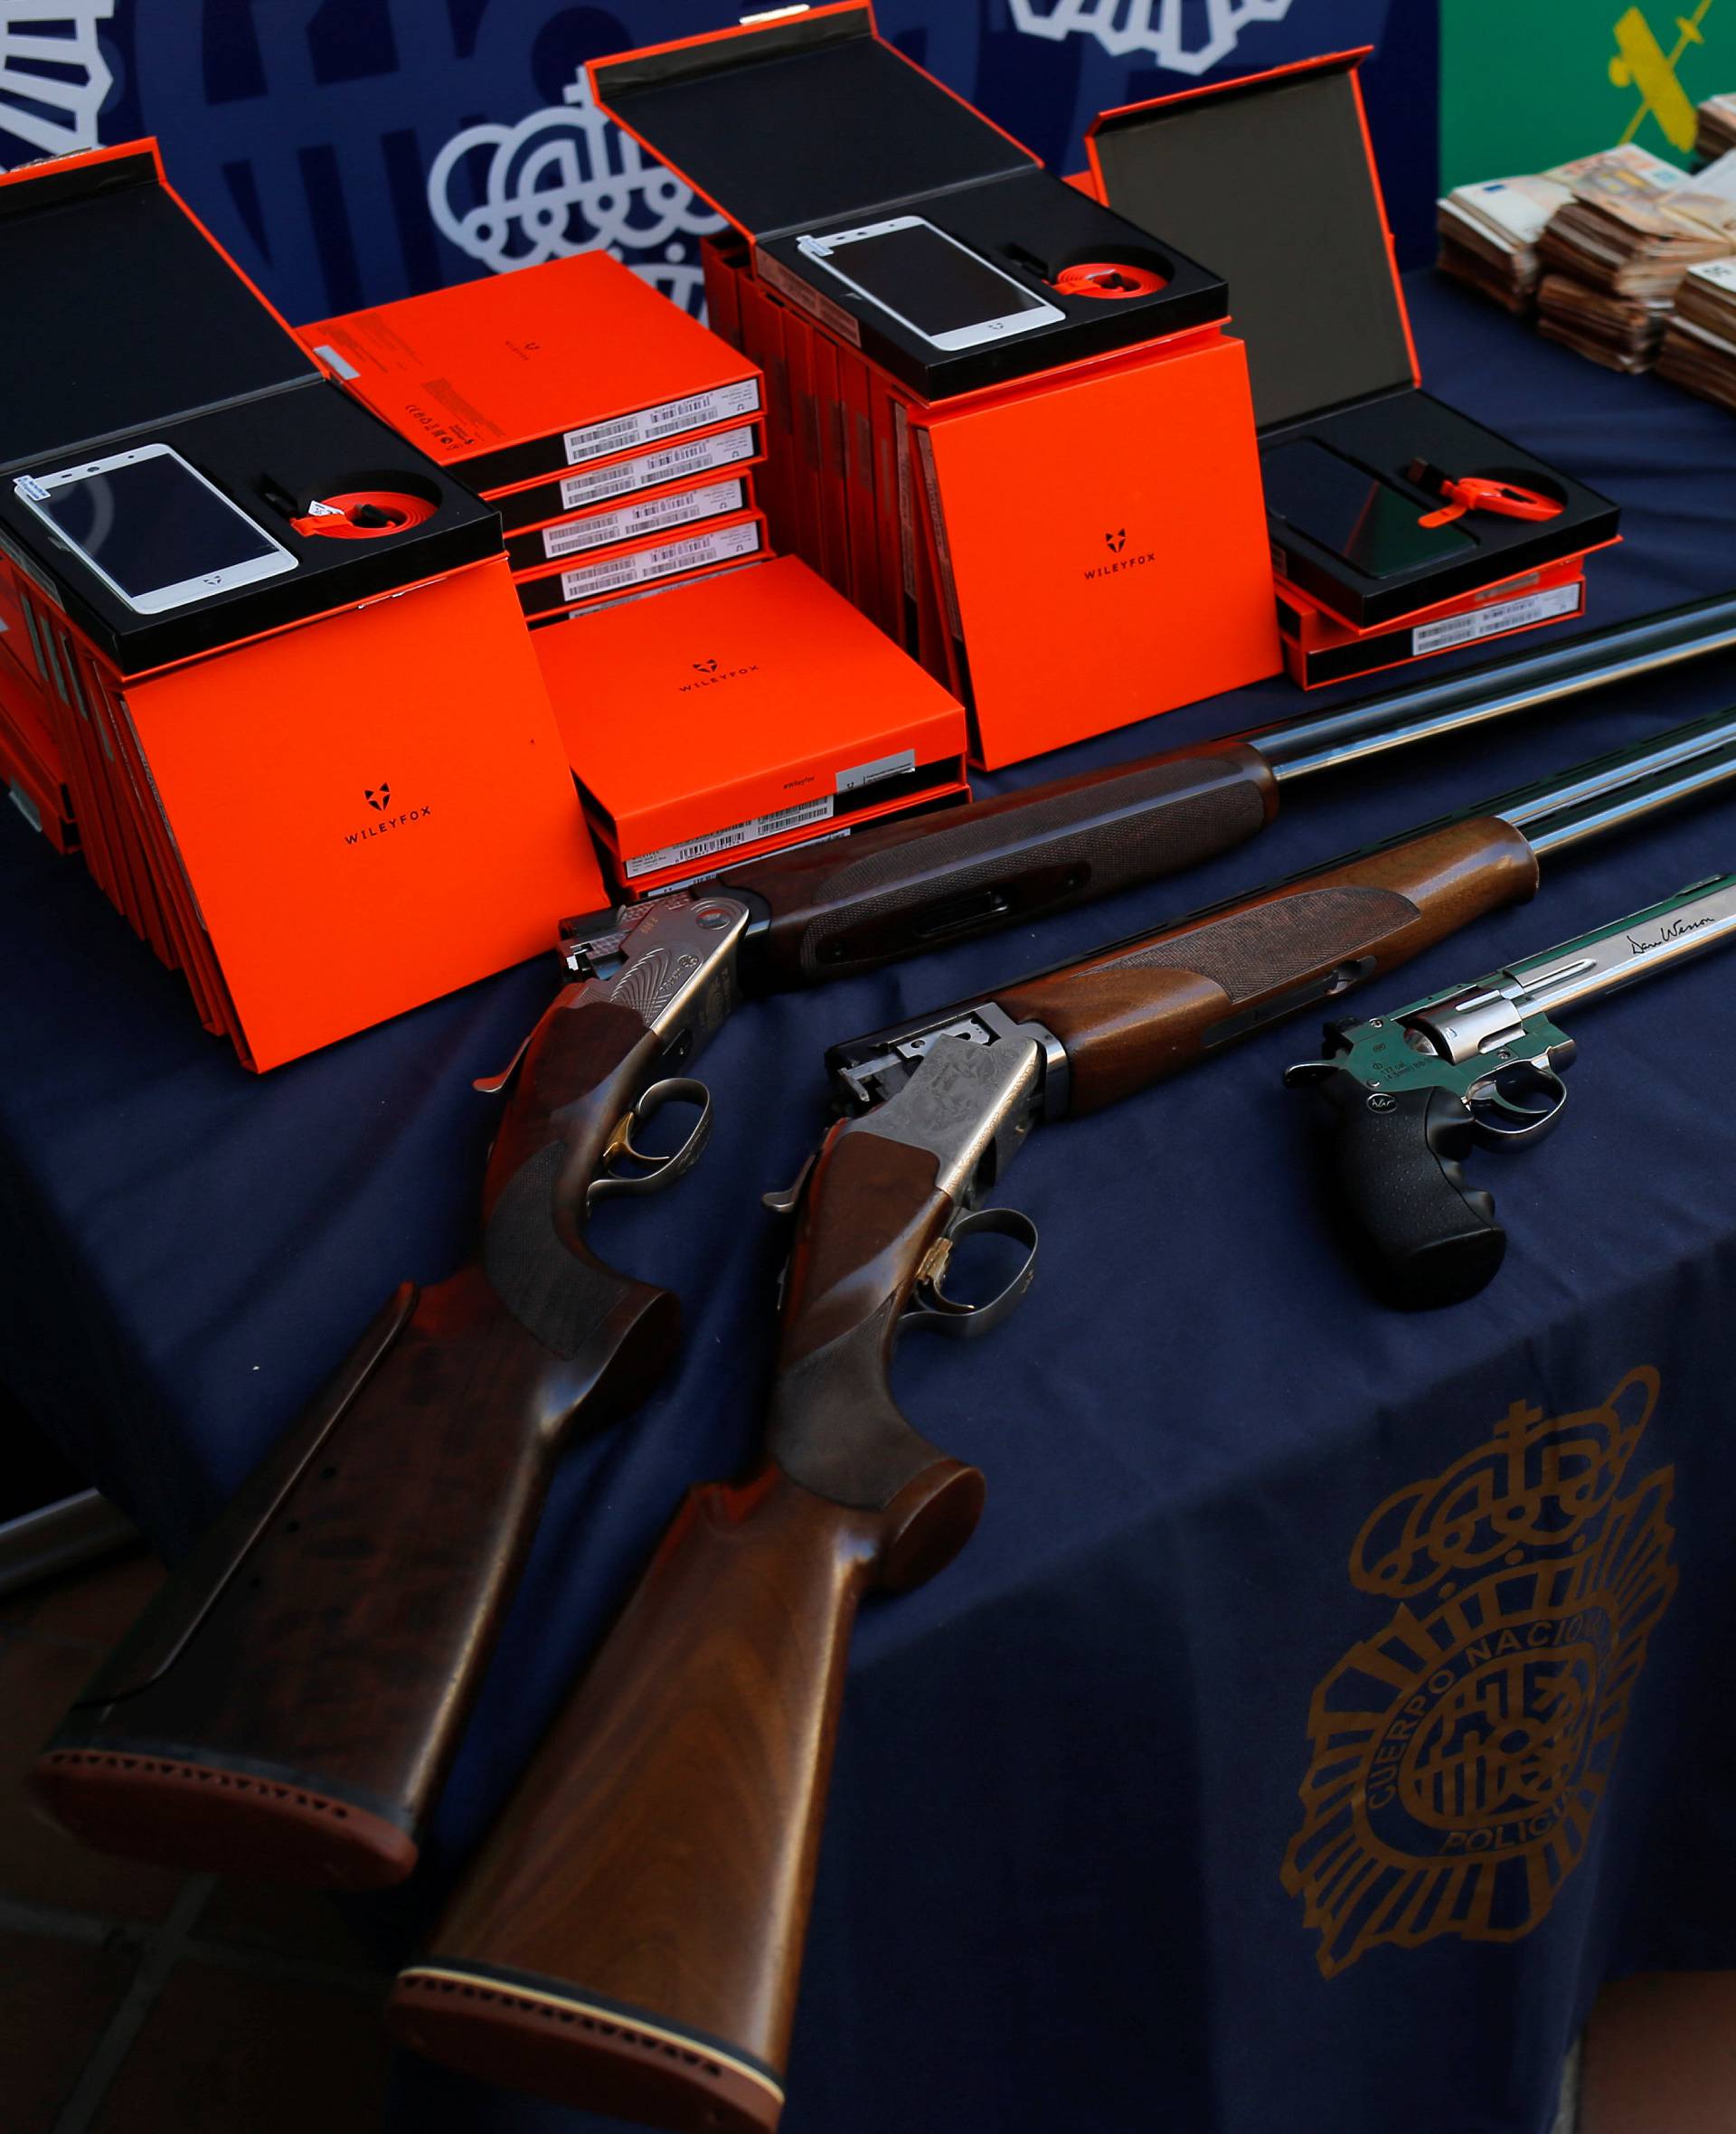 Police display arms and other material which was seized during a drug bust in which officials have seized more than six tonnes of cocaine hidden among bunches of bananas at an industrial estate at the police headquarters in Malaga